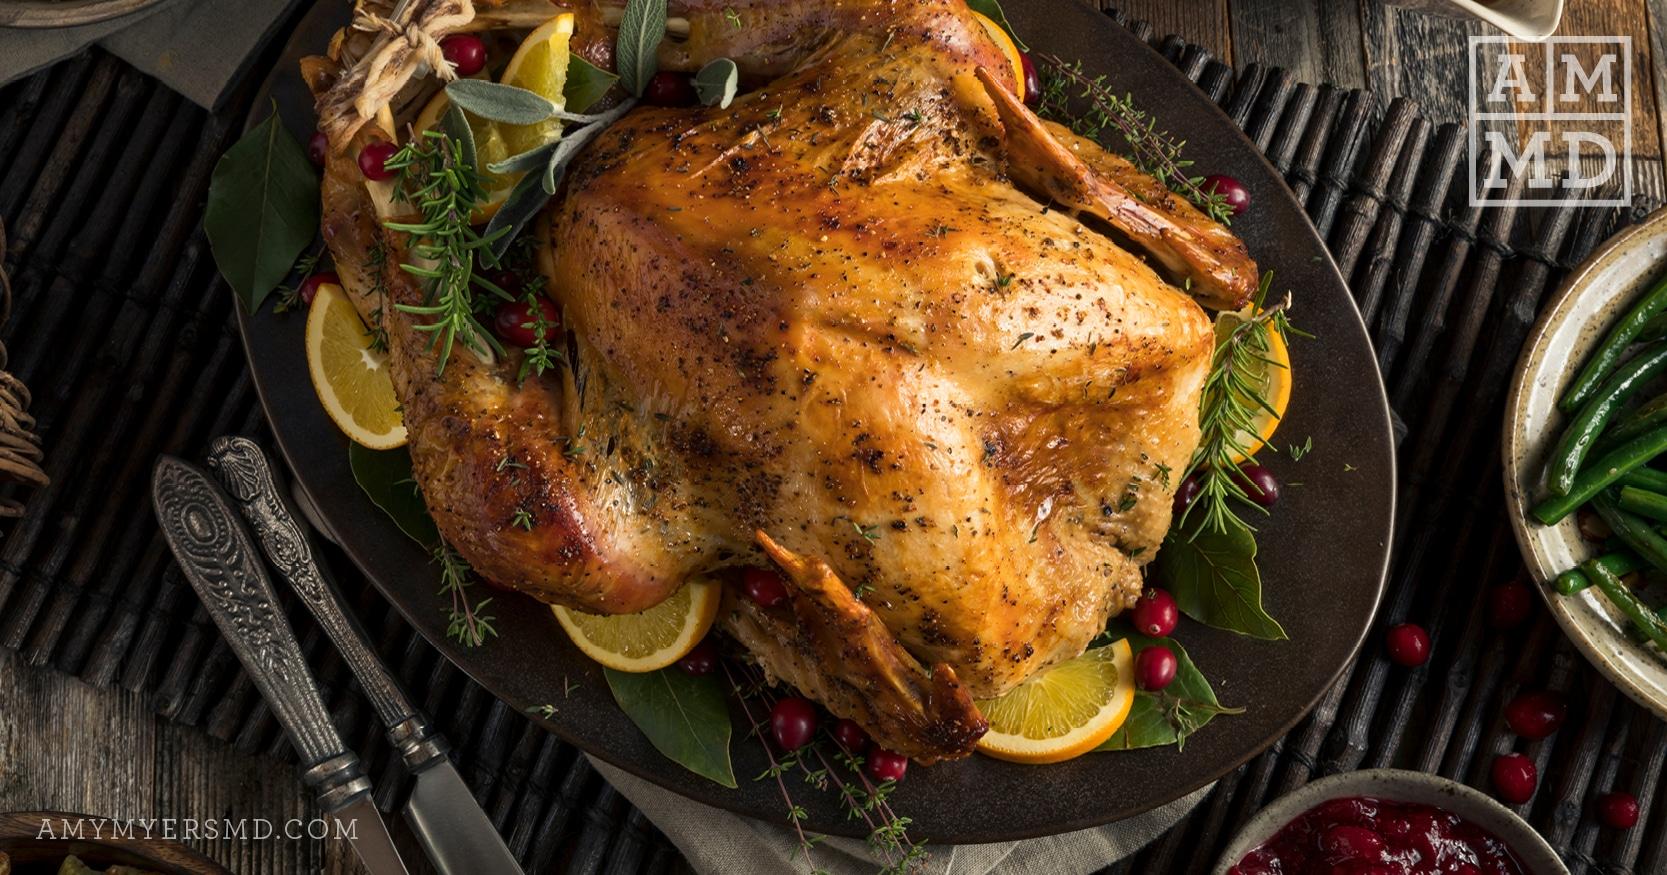 9 Tips For A Healthier Thanksgiving